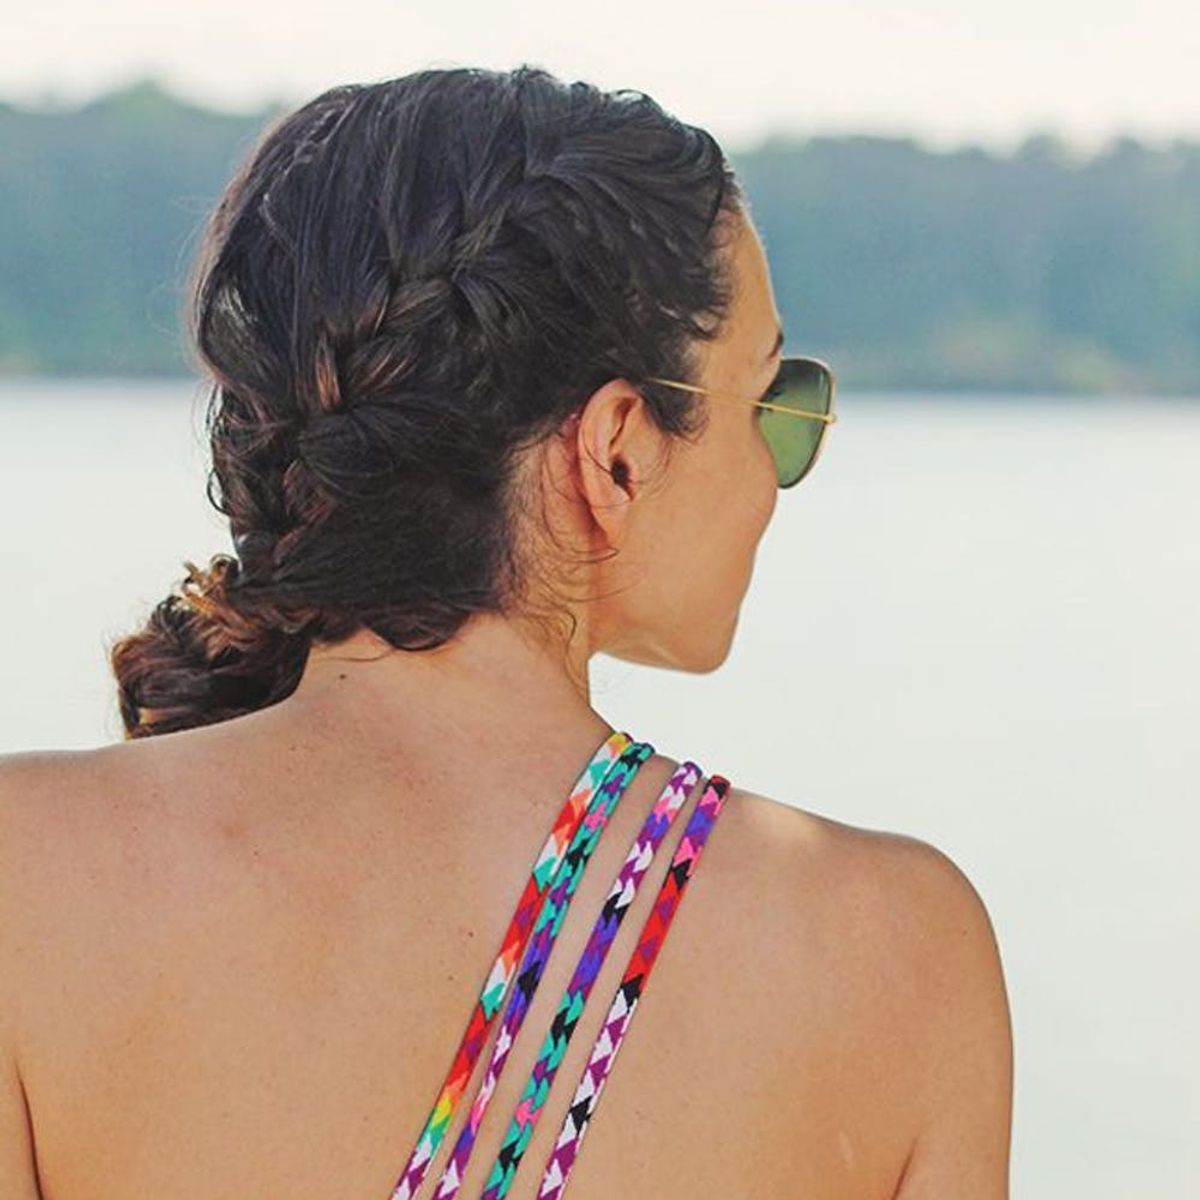 11 Gym Hairstyles You’ll Wear All Summer Long